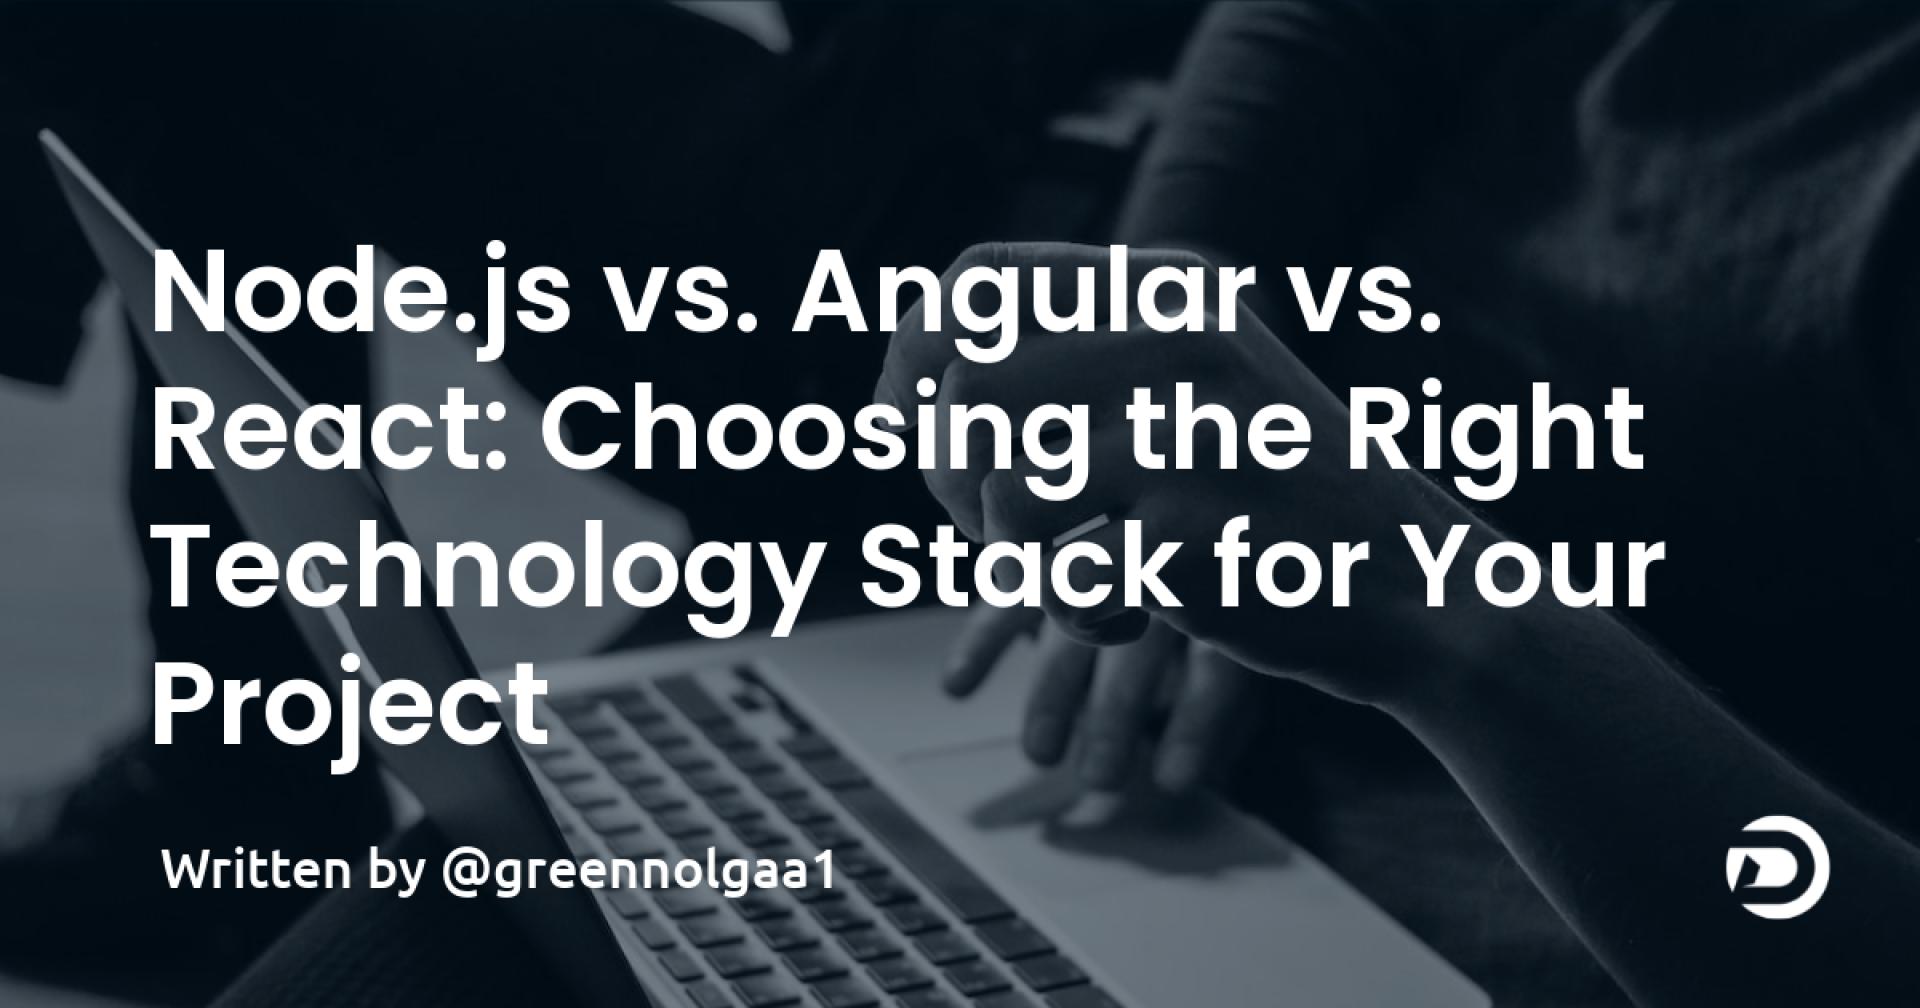 Node.js vs. Angular vs. React: Choosing the Right Technology Stack for Your Project